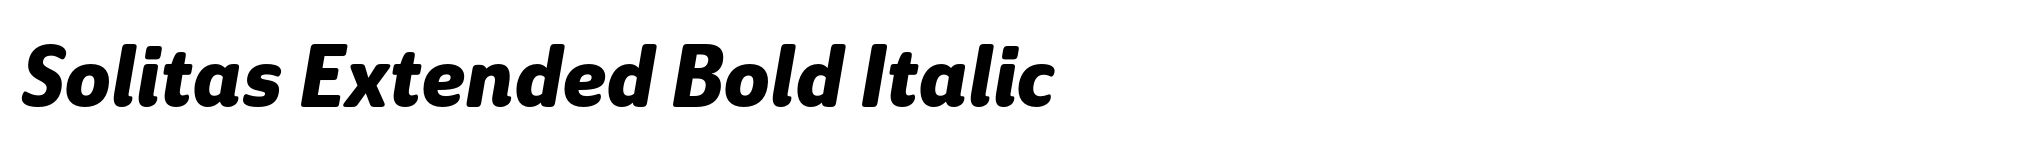 Solitas Extended Bold Italic image